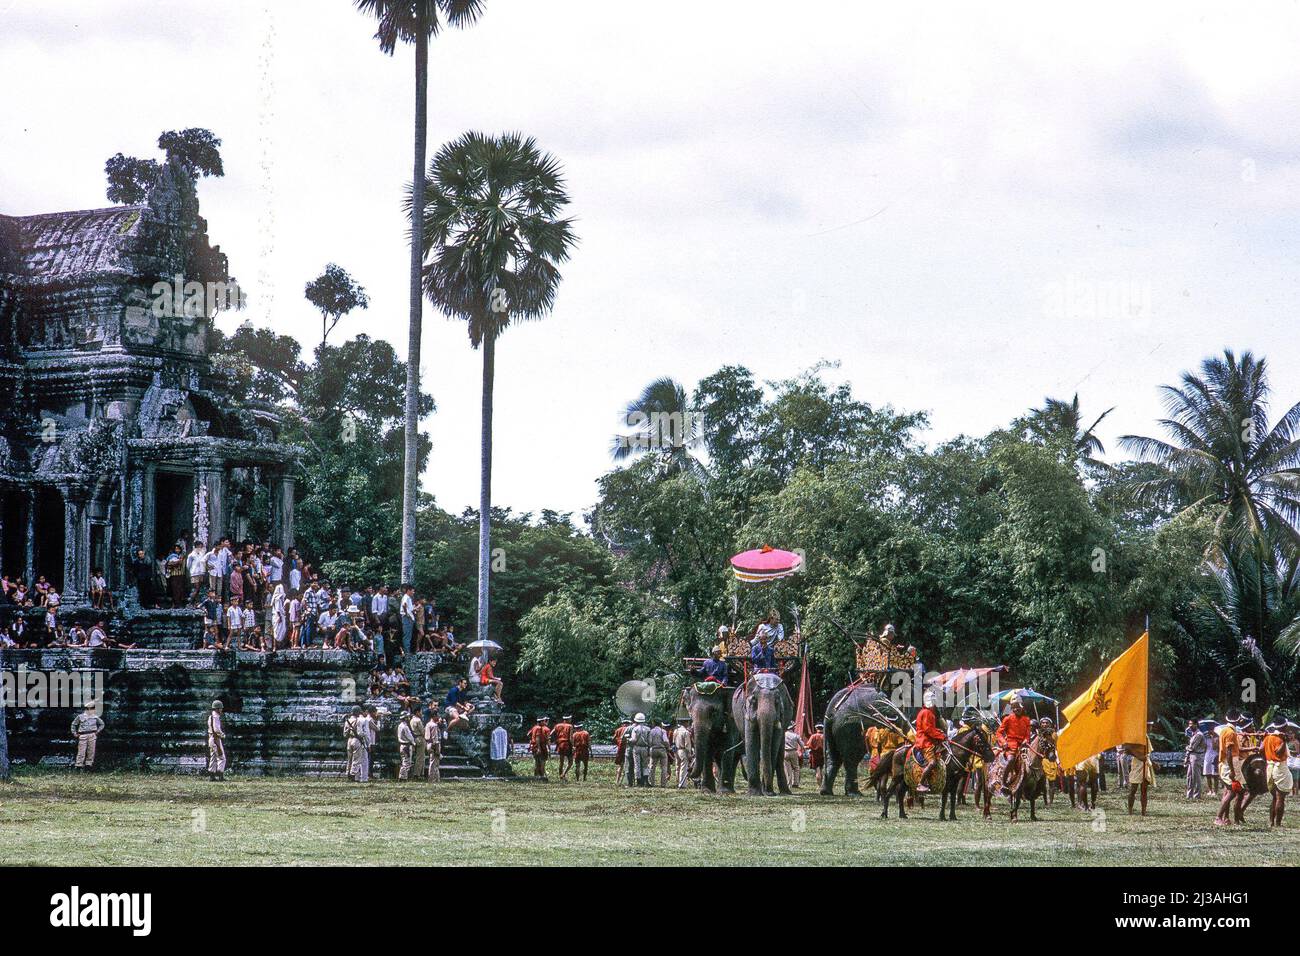 Costumed actors re-enact historic battles for a movie being directed by Prince Norodom Sihanouk, at Angkor Wat, Cambodia, 1966 Stock Photo